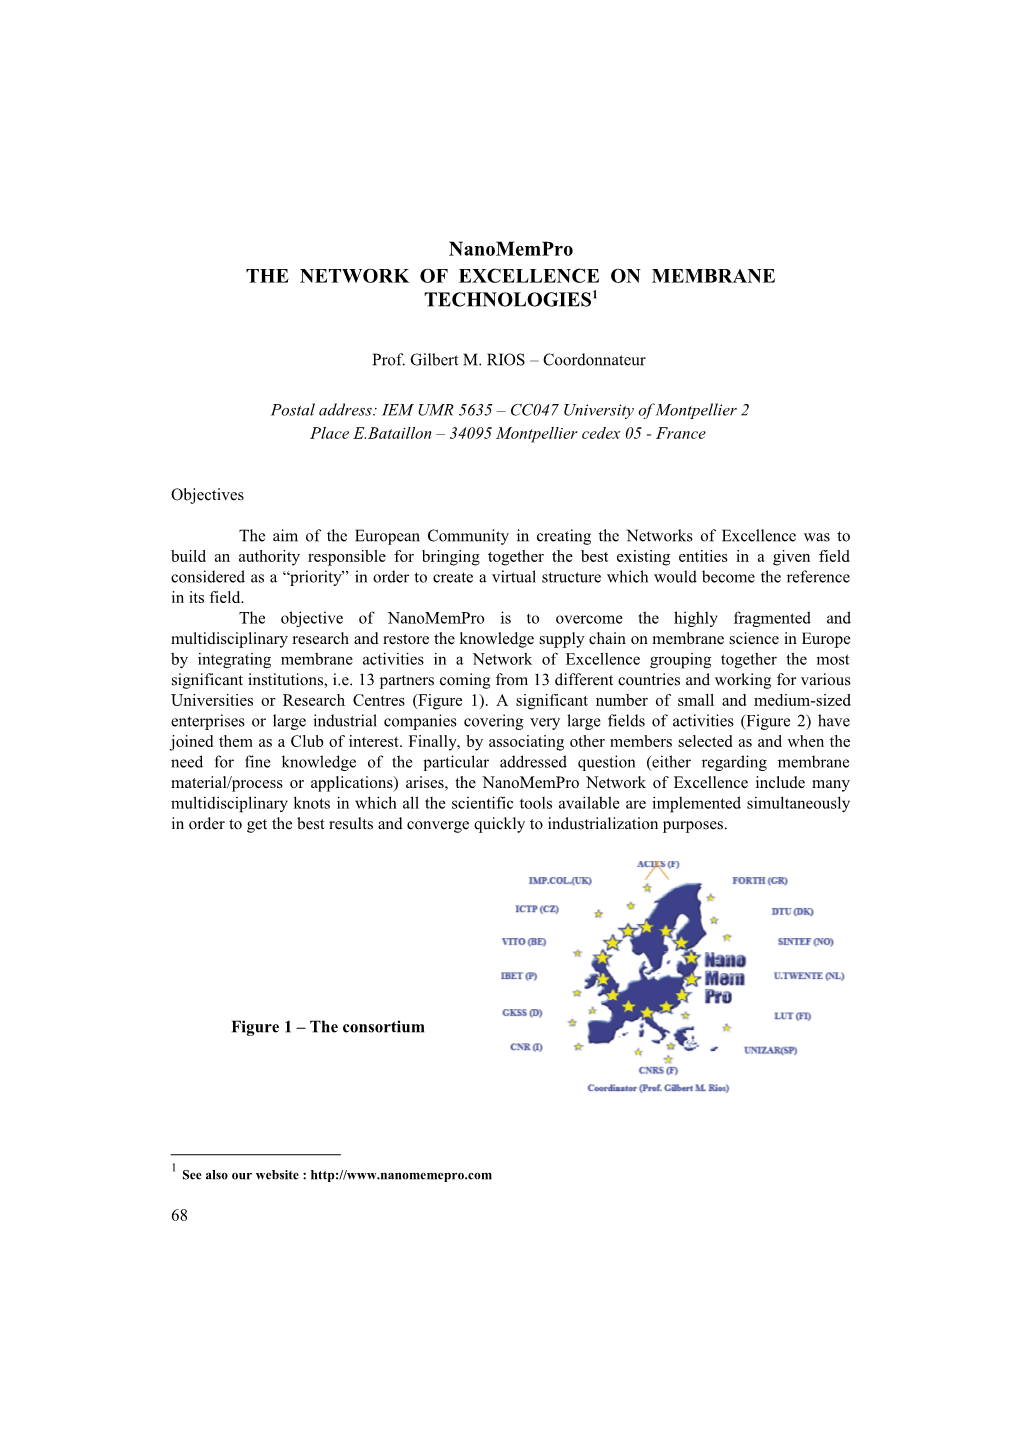 The Network of Excellence on Membrane Technologies 1